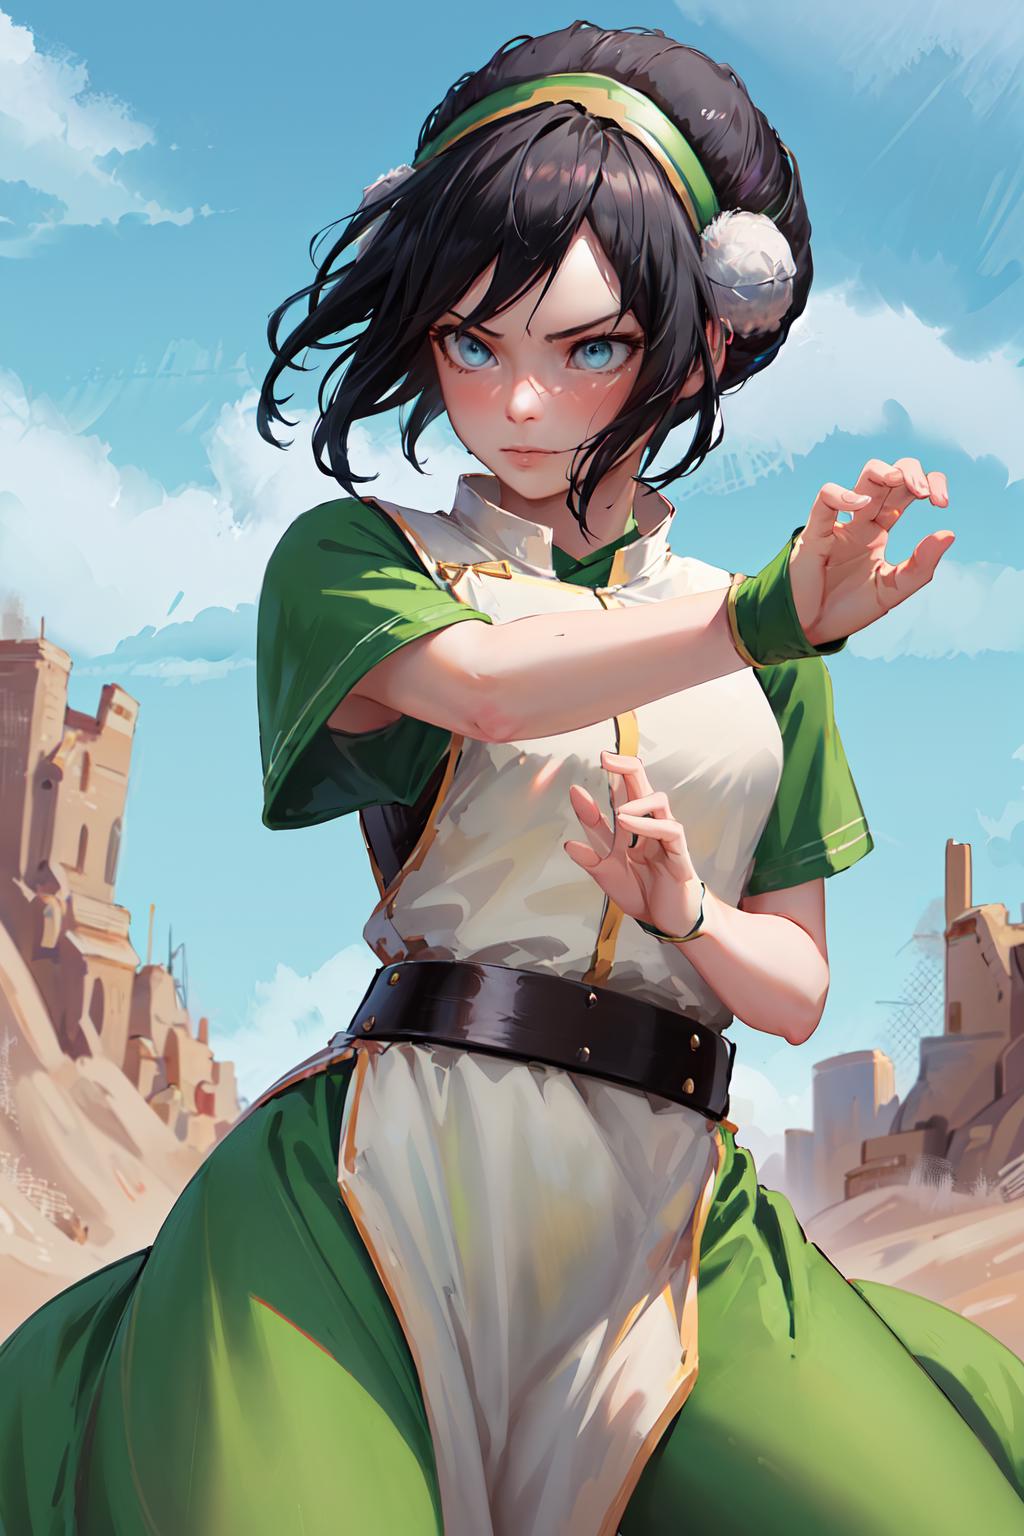 Toph Beifong / Avatar: the Last Airbender image by h_madoka